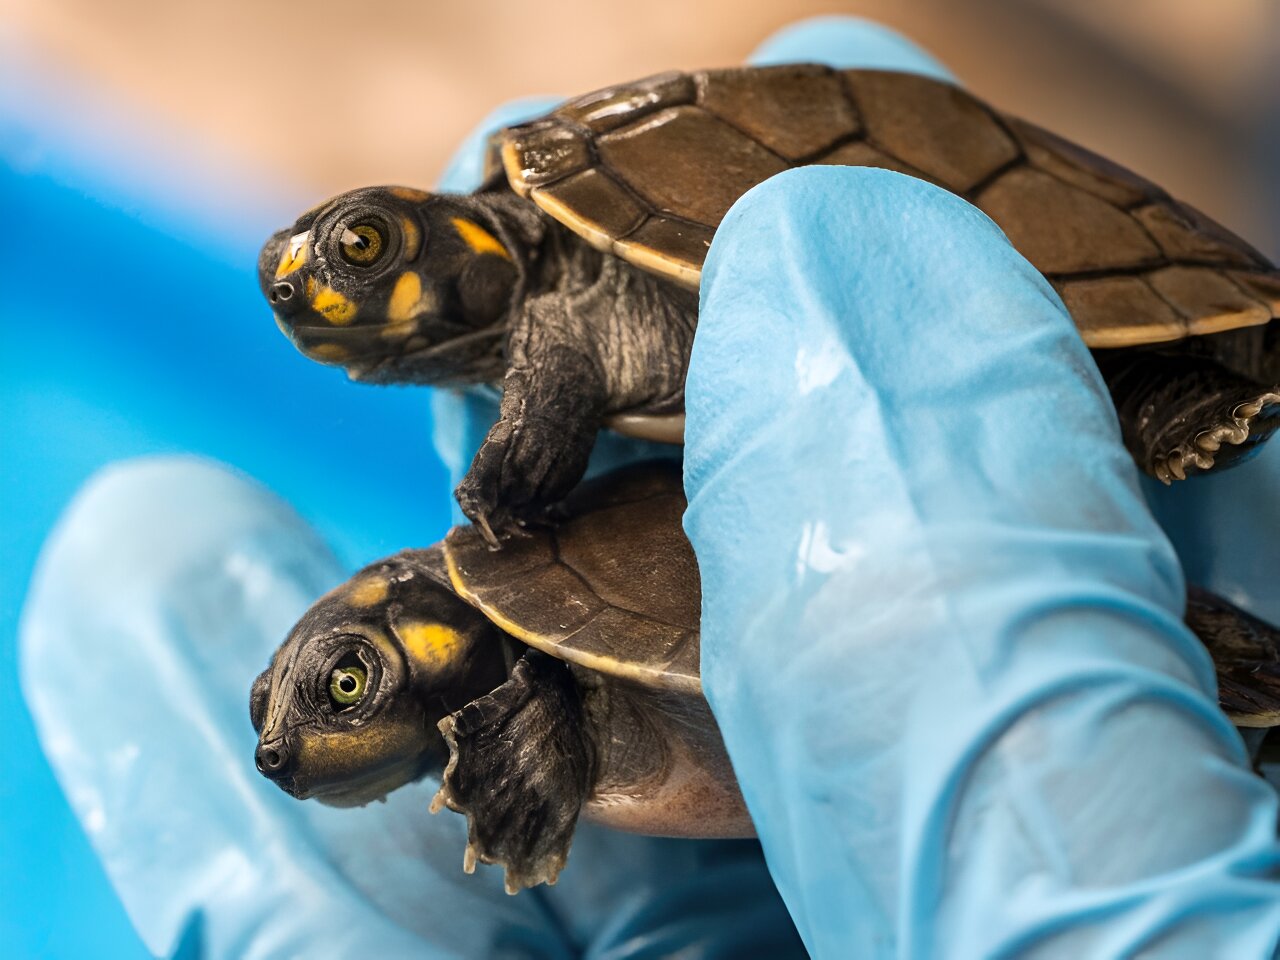 Peru Confiscates 4,000 Live Amazon Turtles at Airport